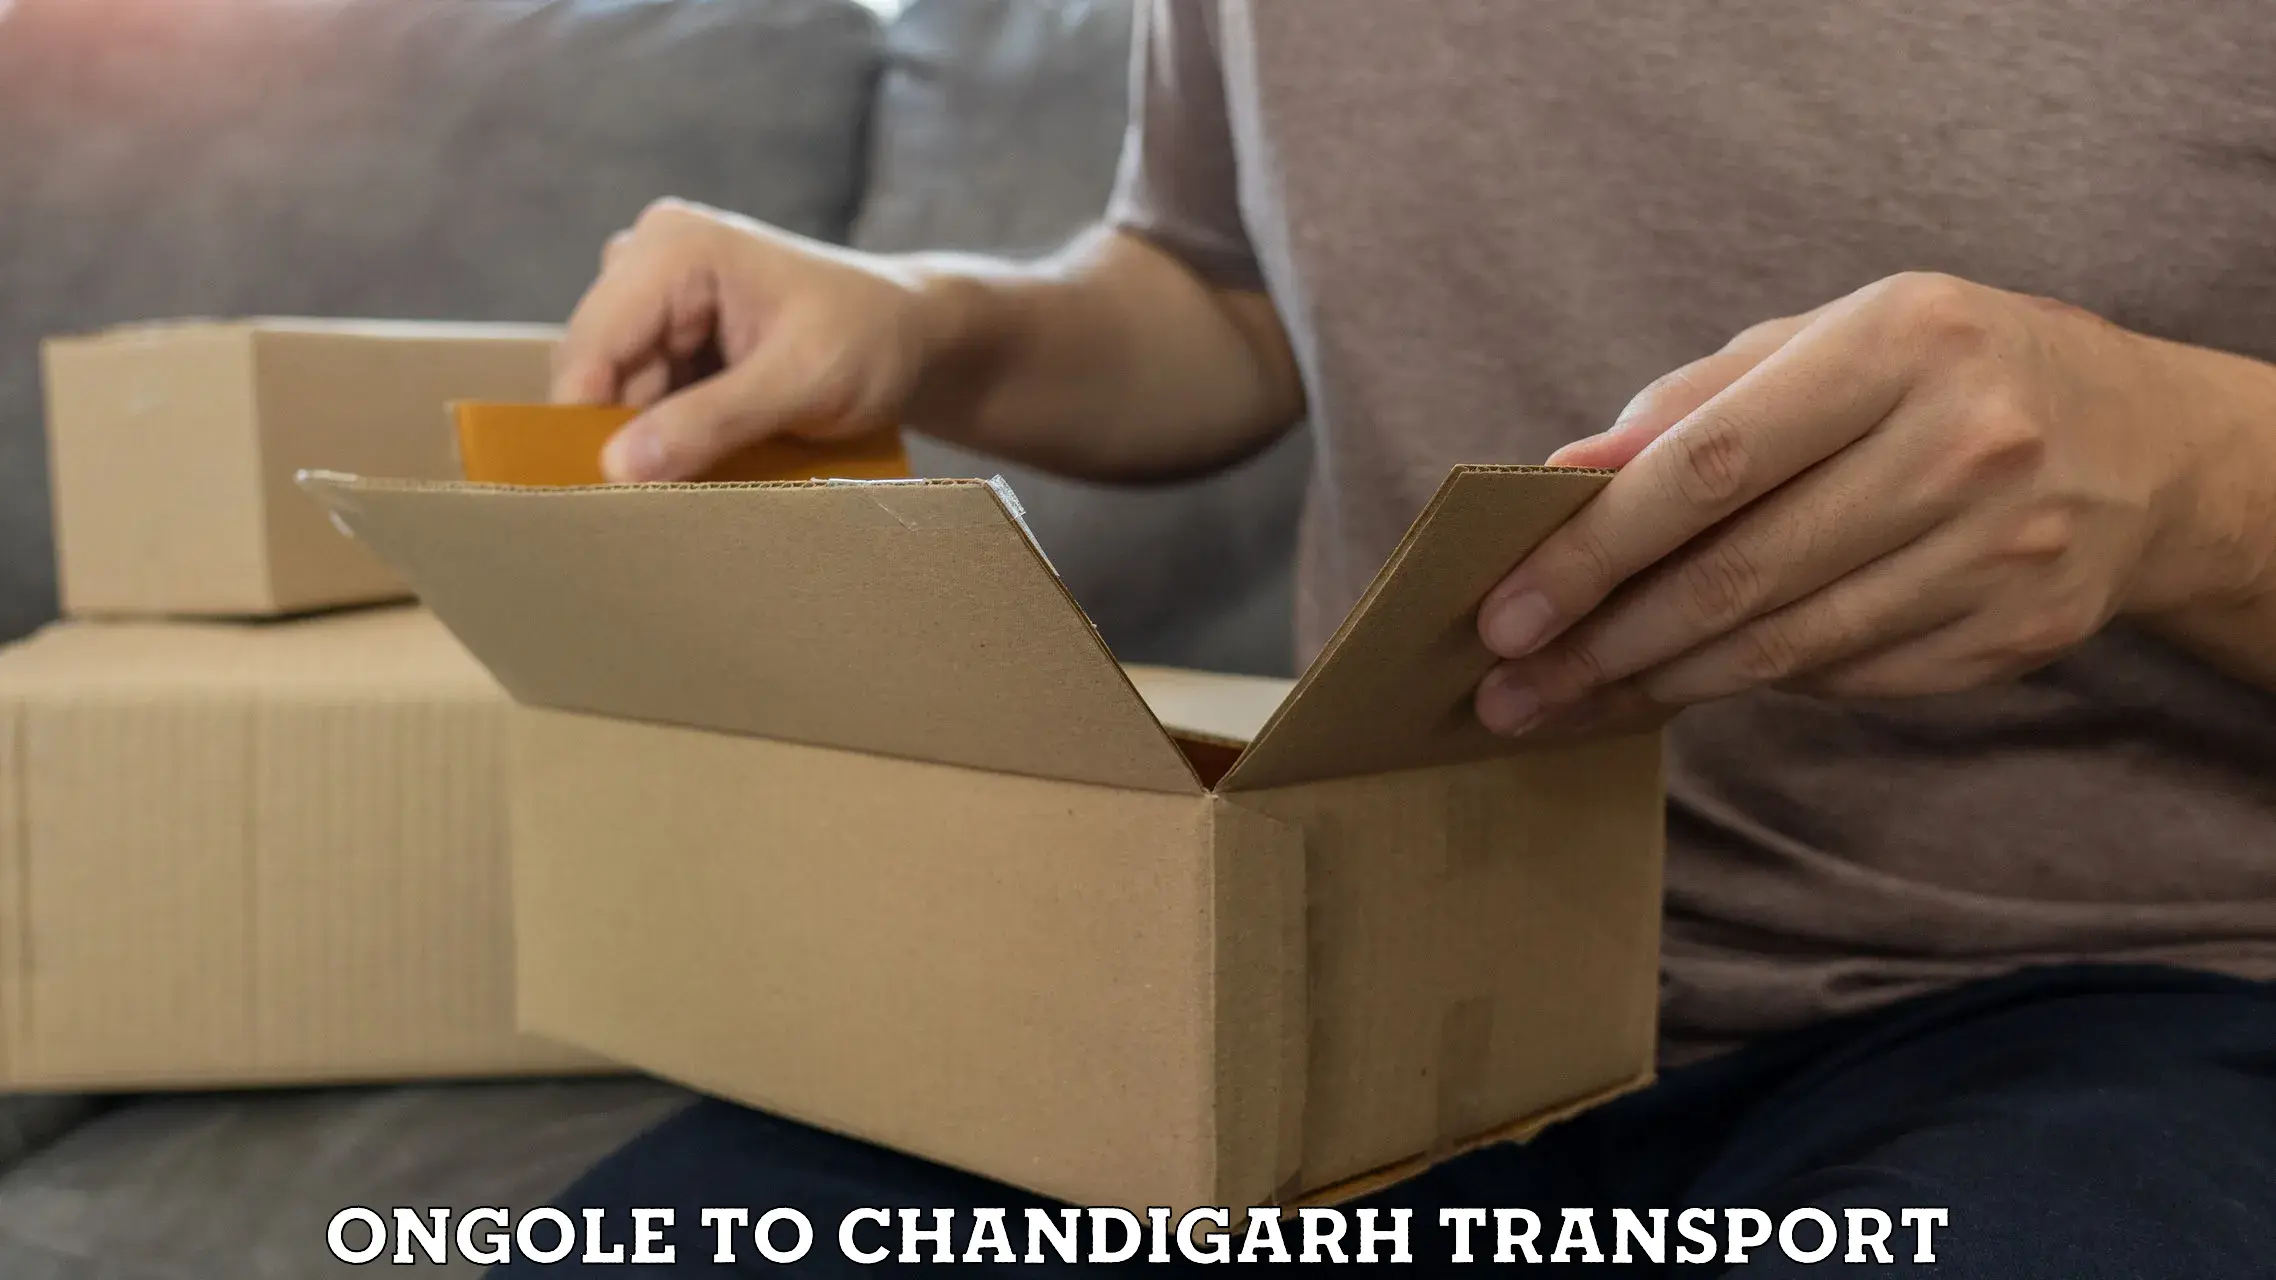 Transport shared services Ongole to Chandigarh